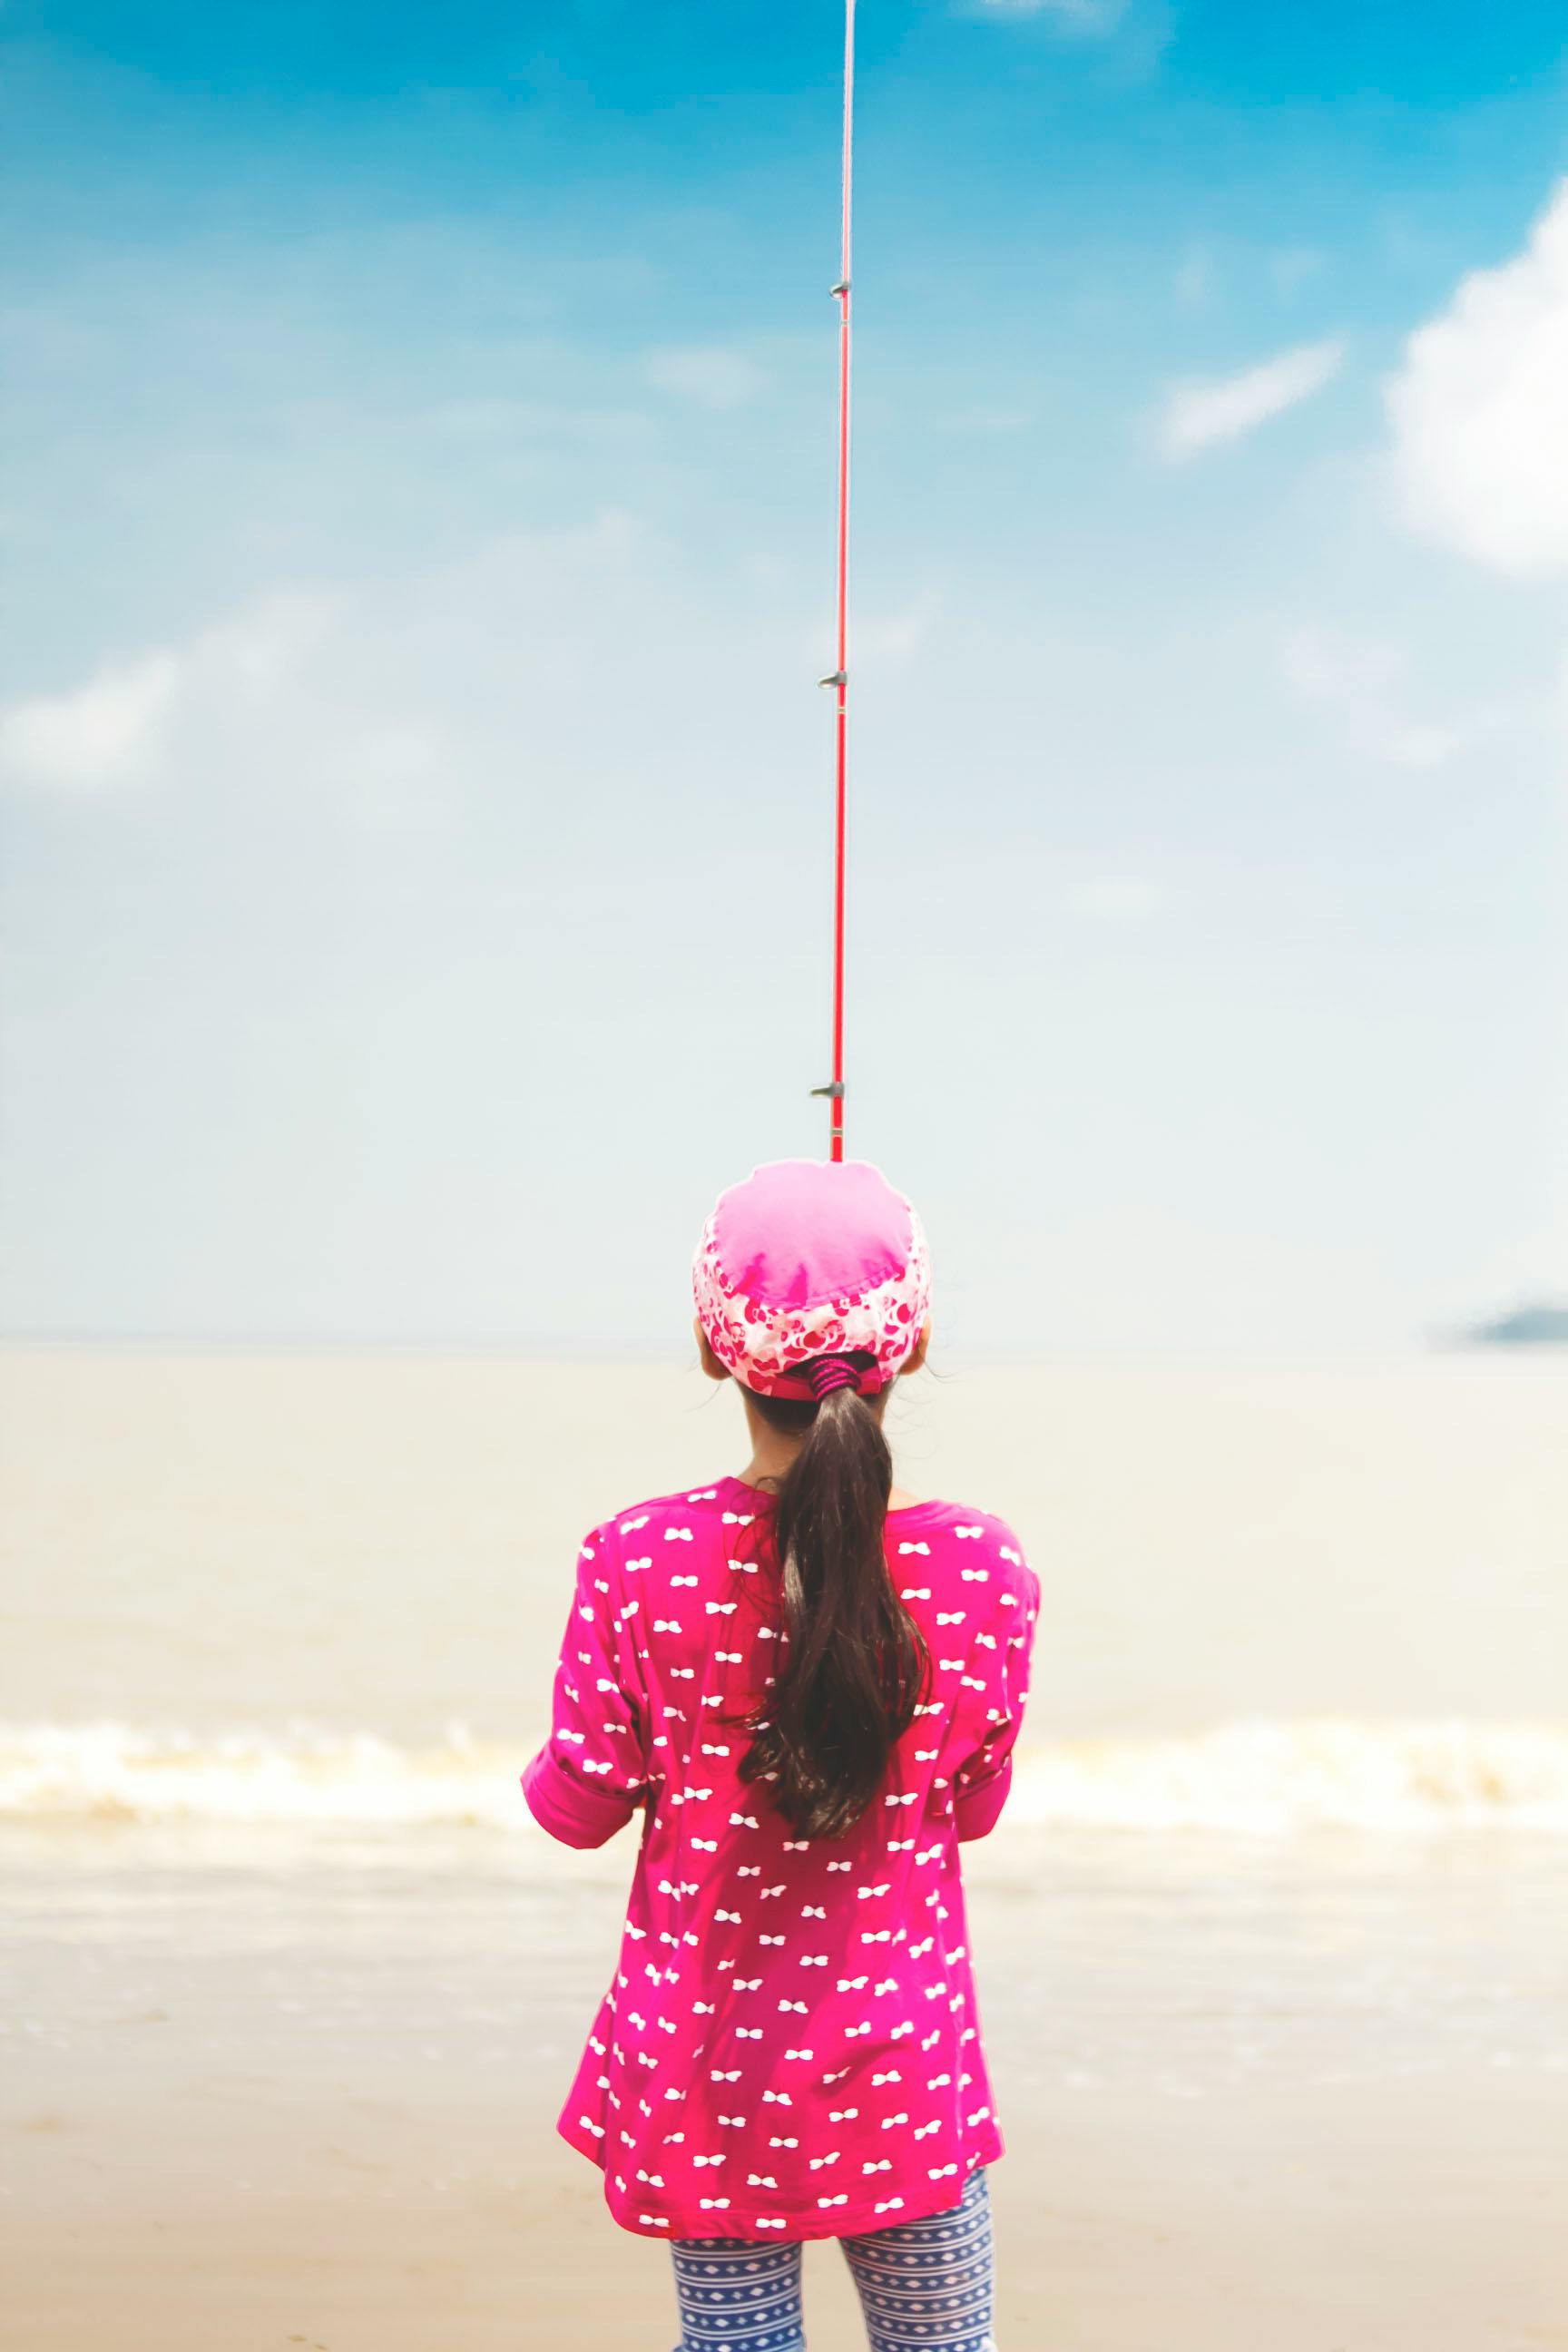 Woman in Pink Long-sleeved Shirt Holding Red Fishing Rod · Free